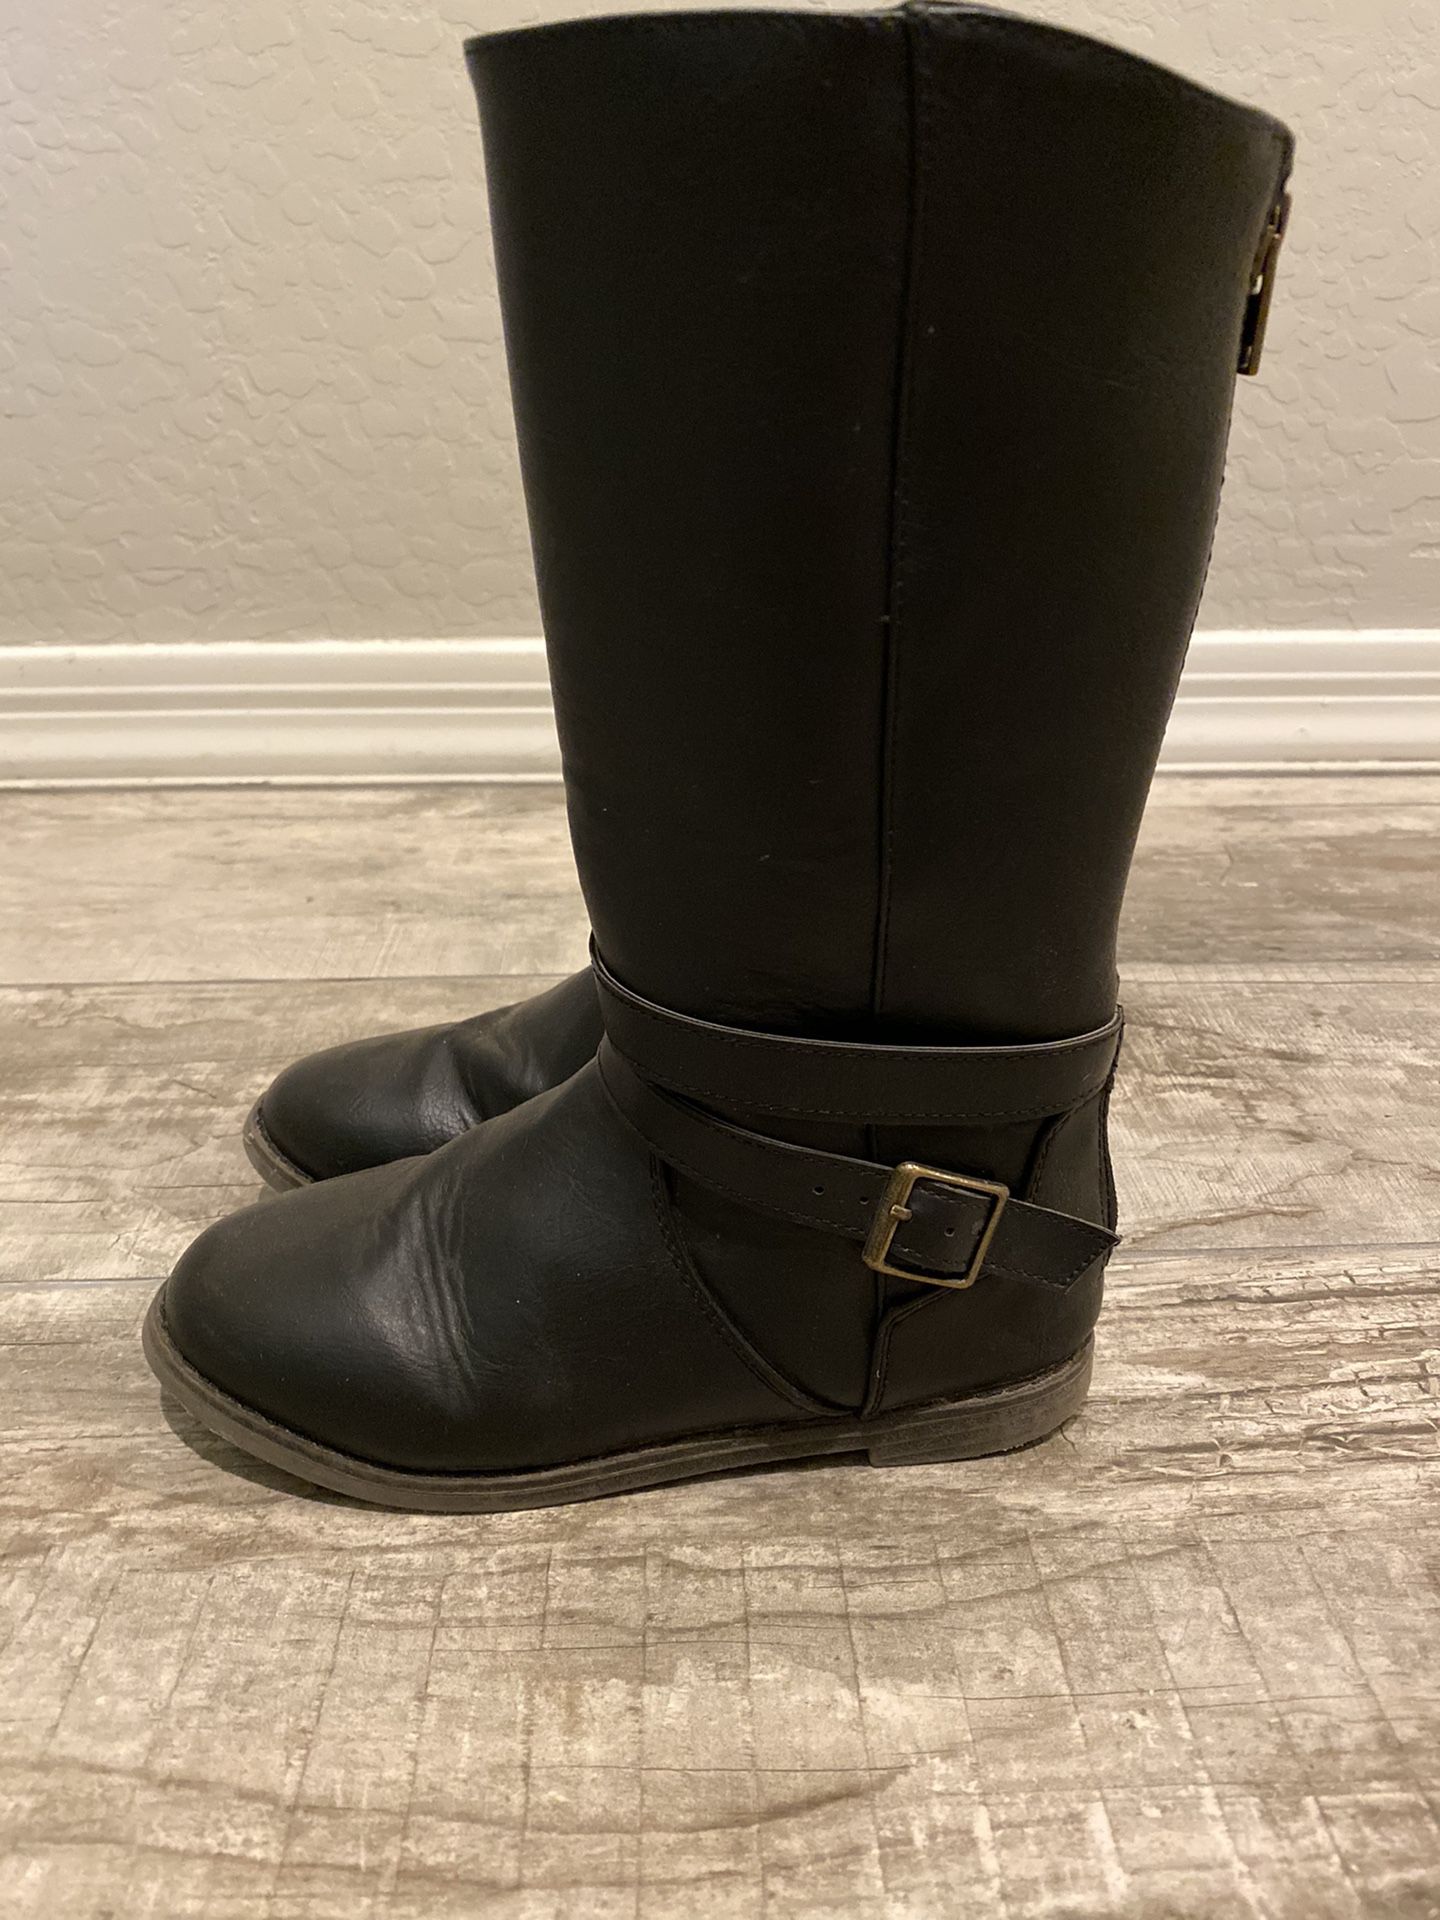 Little girl’s Black Boots Size 13